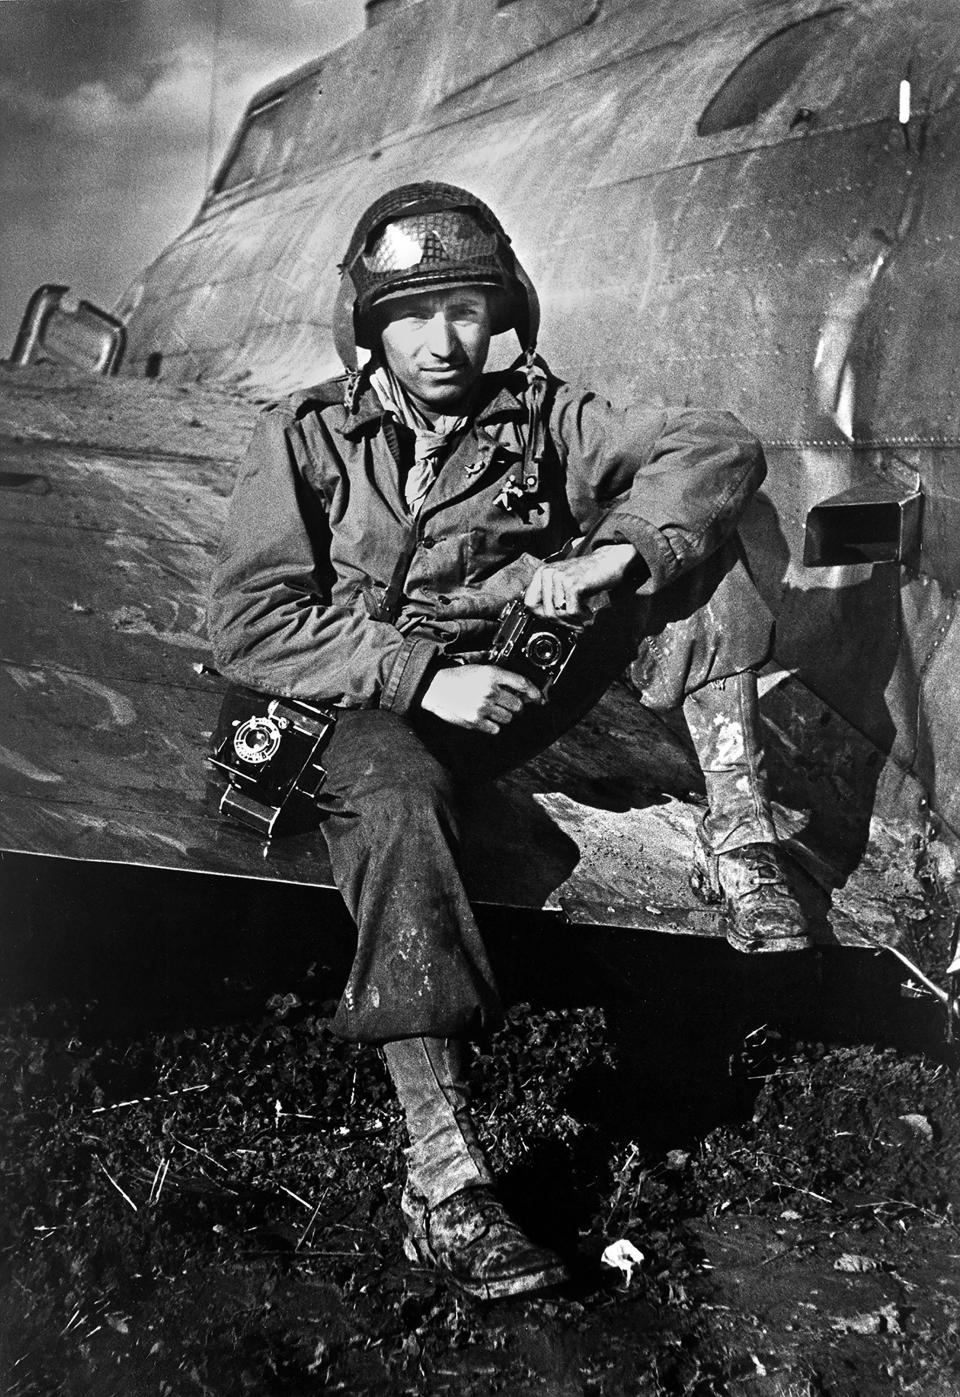 This 1945 photo shows photographer PFC Tony Vaccaro posing for a photo on the wing of an airplane during WWII. Vaccaro, 97, was thrown into WWII with the 83rd Infantry division which fought, like Charles Shay, in Normandy, and then came to Schmetz's doorstep for the Battle of the Bulge. On top of his military gear, he also carried a camera, and became a fashion and celebrity photographer after the war. COVID-19 caught up with him last month. Like everything bad life threw at him, he shook it off, attributing his survival to plain "fortune." (Photo courtesy Tony Vaccaro via AP)